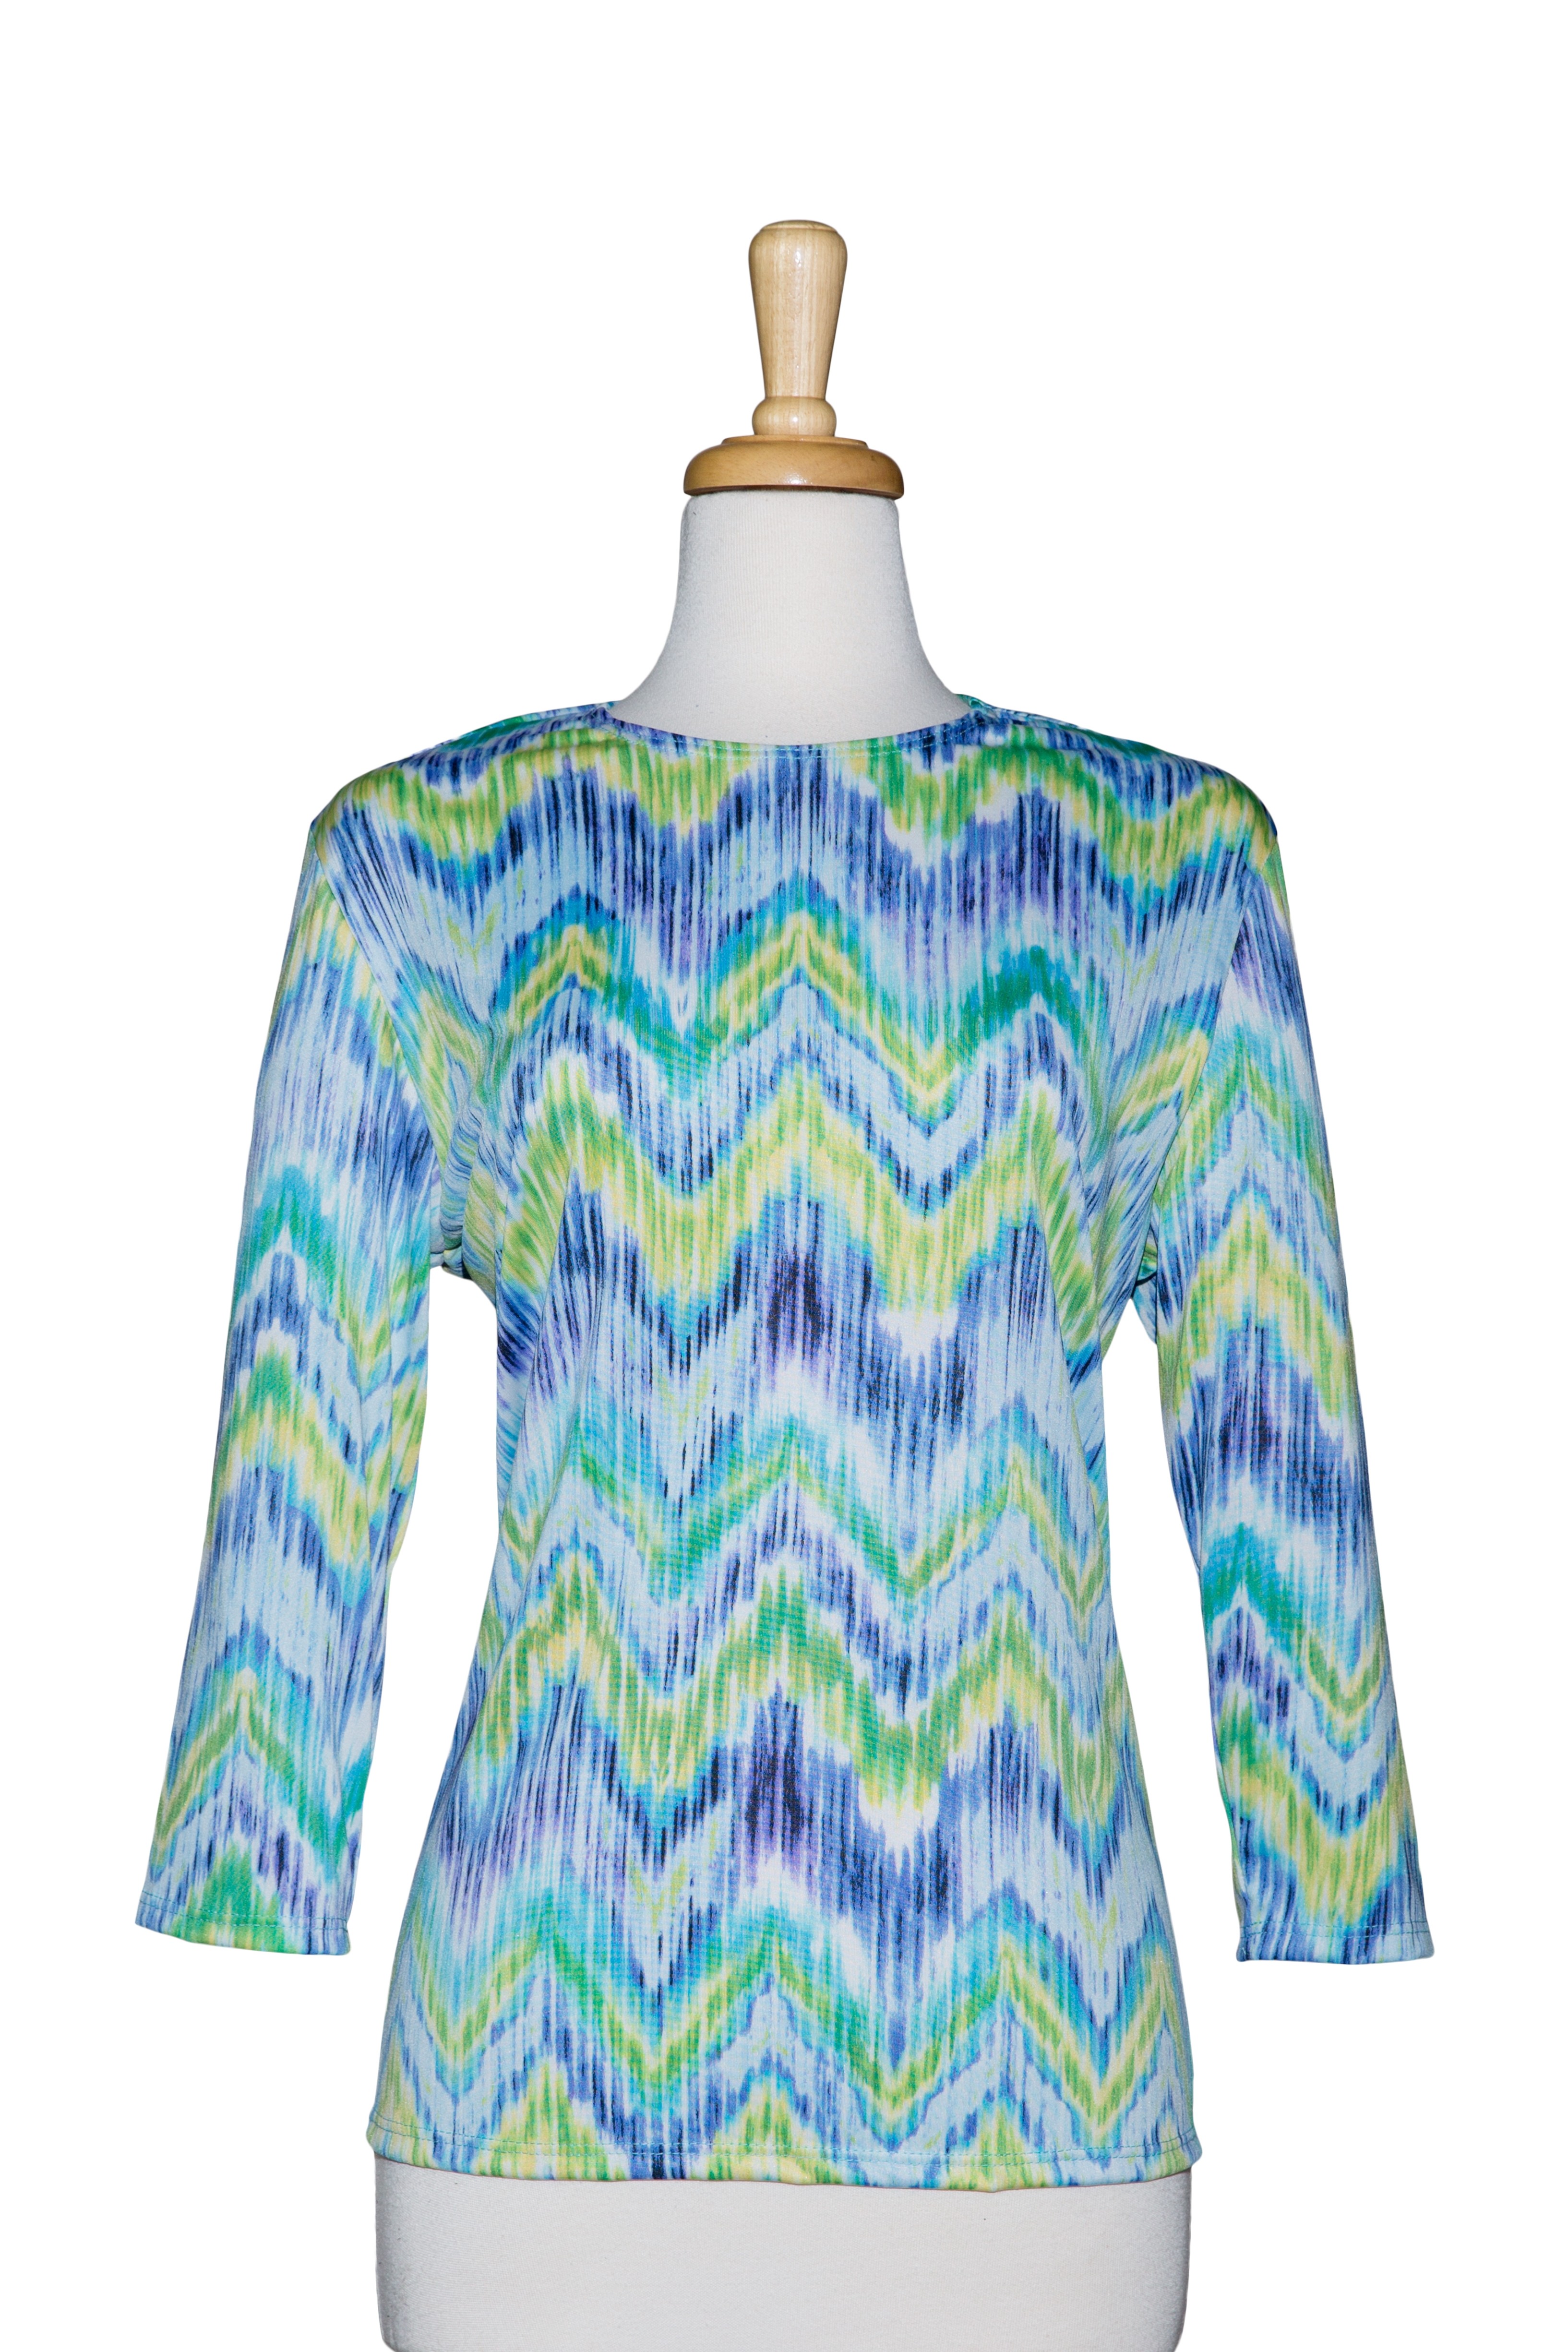 Shades Of Blue and Yellow Zig Zag Microfiber 3/4 Sleeve Top 